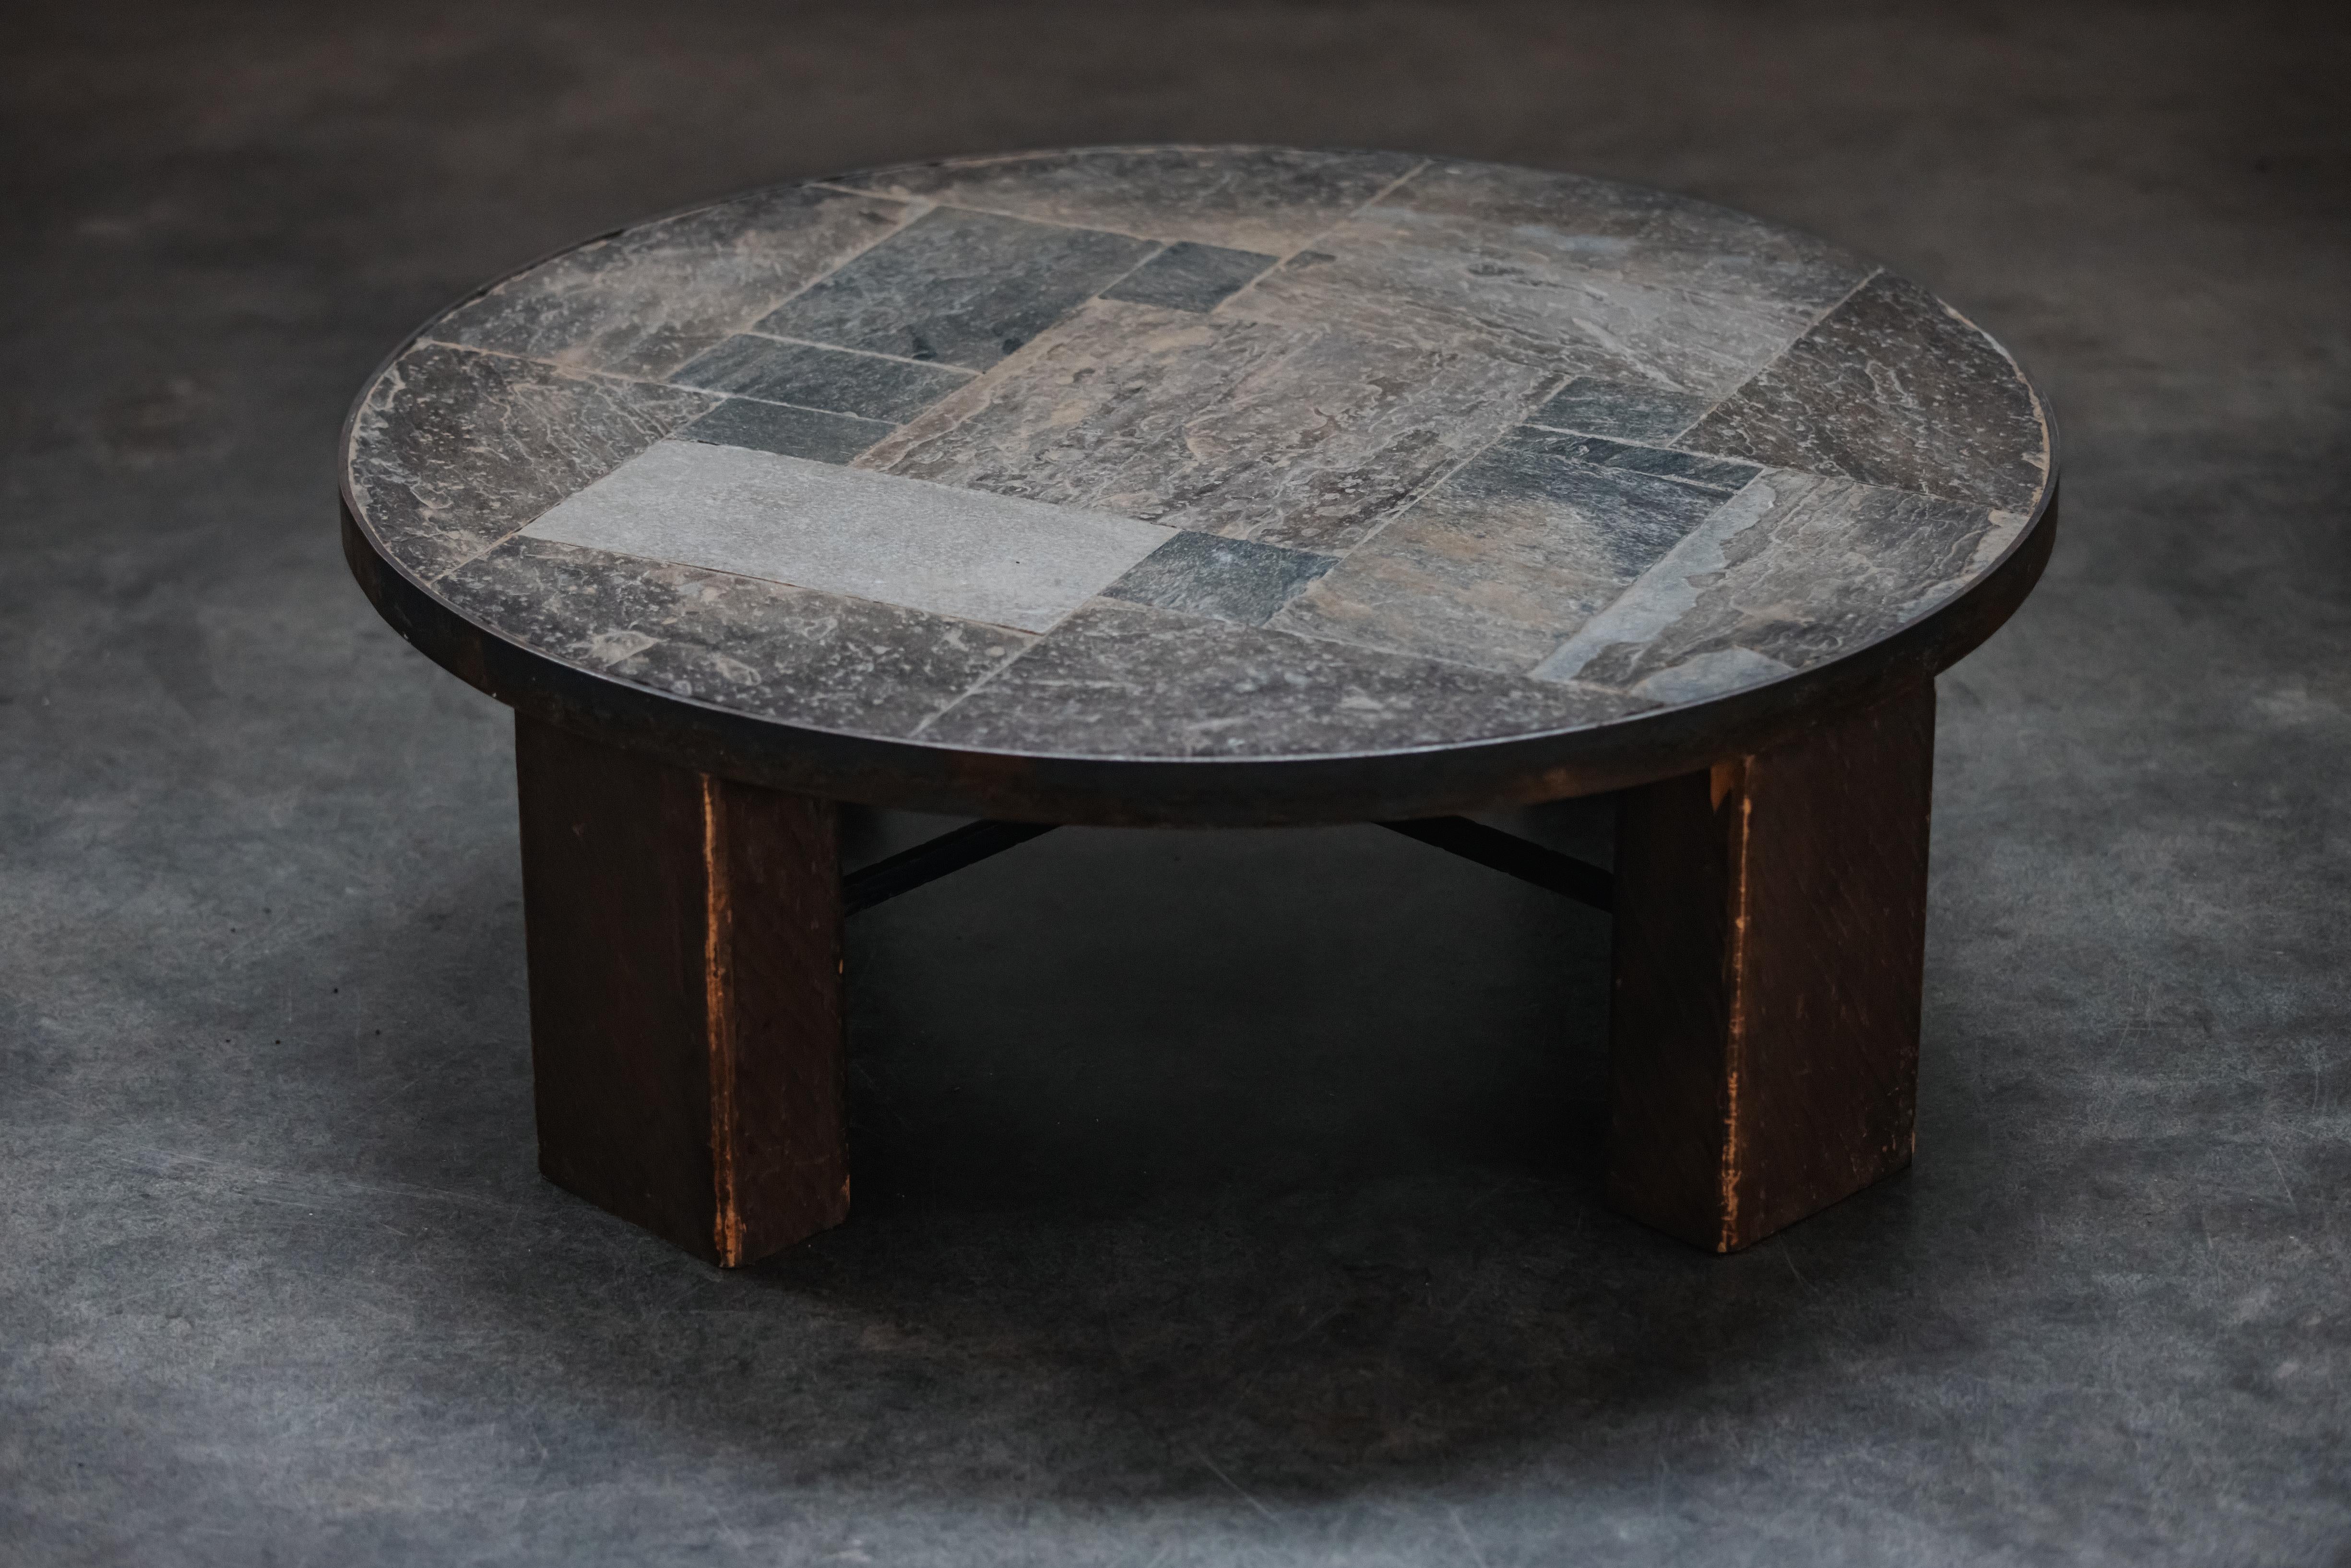 Vintage Slate Stone Coffee Table From France, Circa 1970 For Sale 3